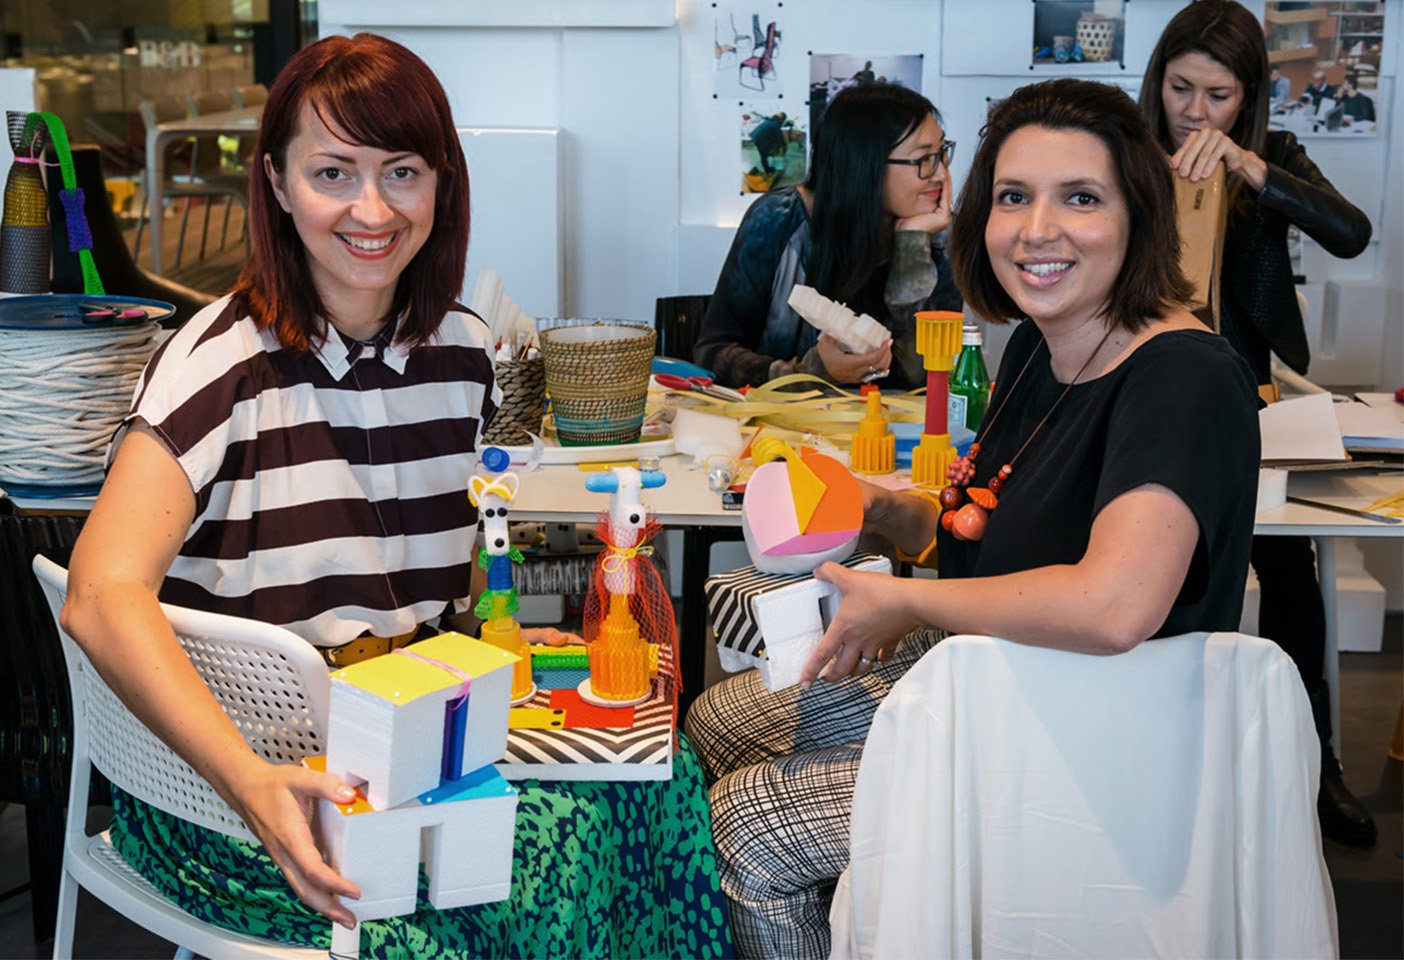 Dana Tomić Hughes, Yellowtrace, and Sarah-Jane Pyke, Arent&Pyke, at the 'Making It' workshop with Patricia Urquiola in 2013 when the designer was back to celebrate Space's 20th birthday. Photo c/o Space.